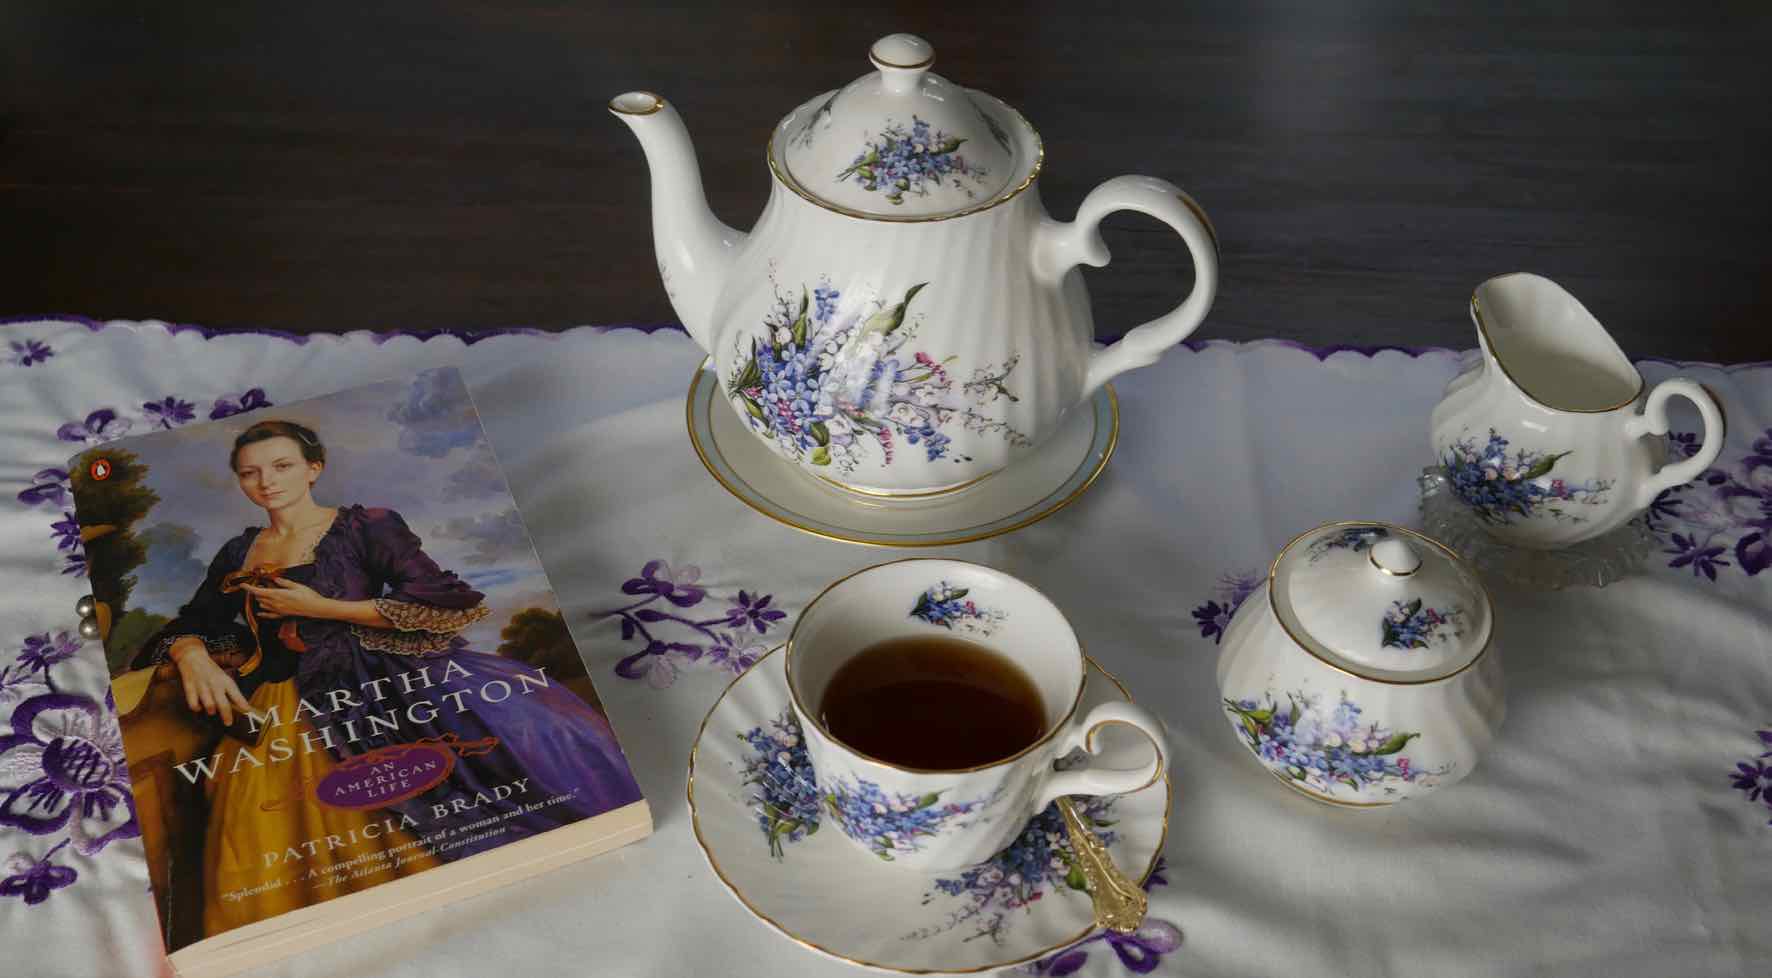 book Martha Washington by Patricia Brady with Anne's tea service on table runner hand-embroidered in Hungary